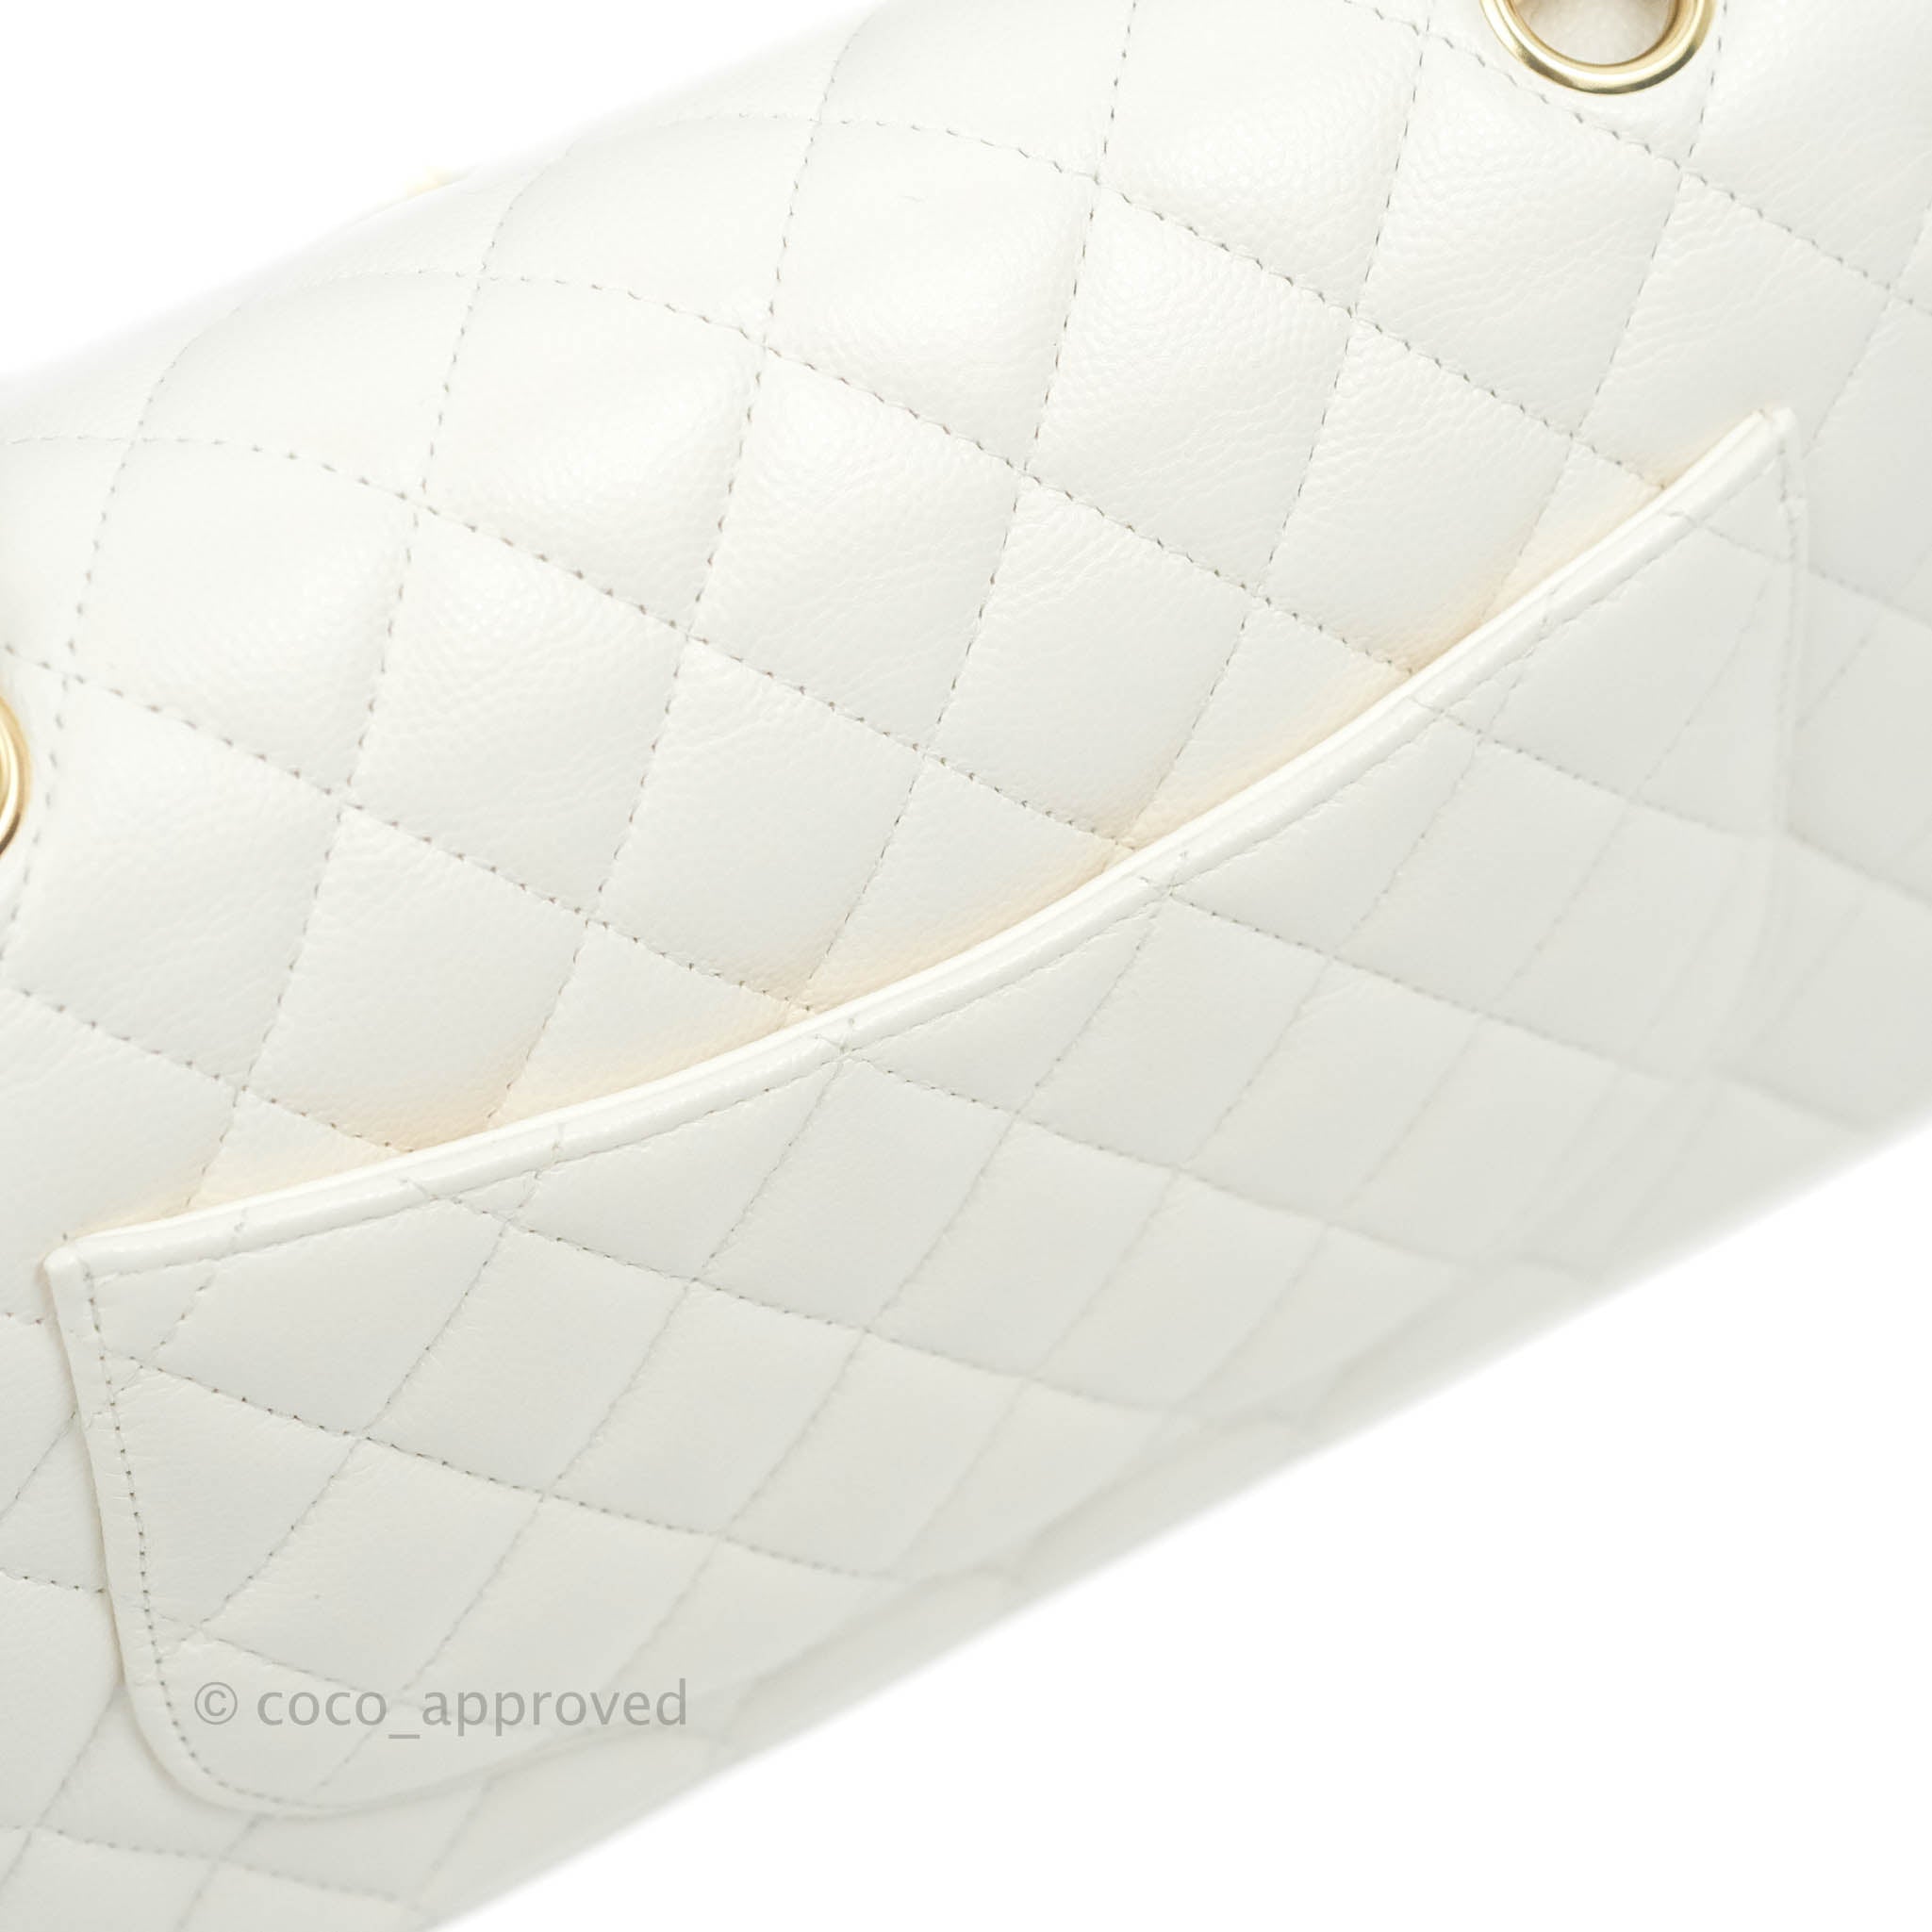 Chanel Small Classic Quilted Flap White Caviar Gold Hardware